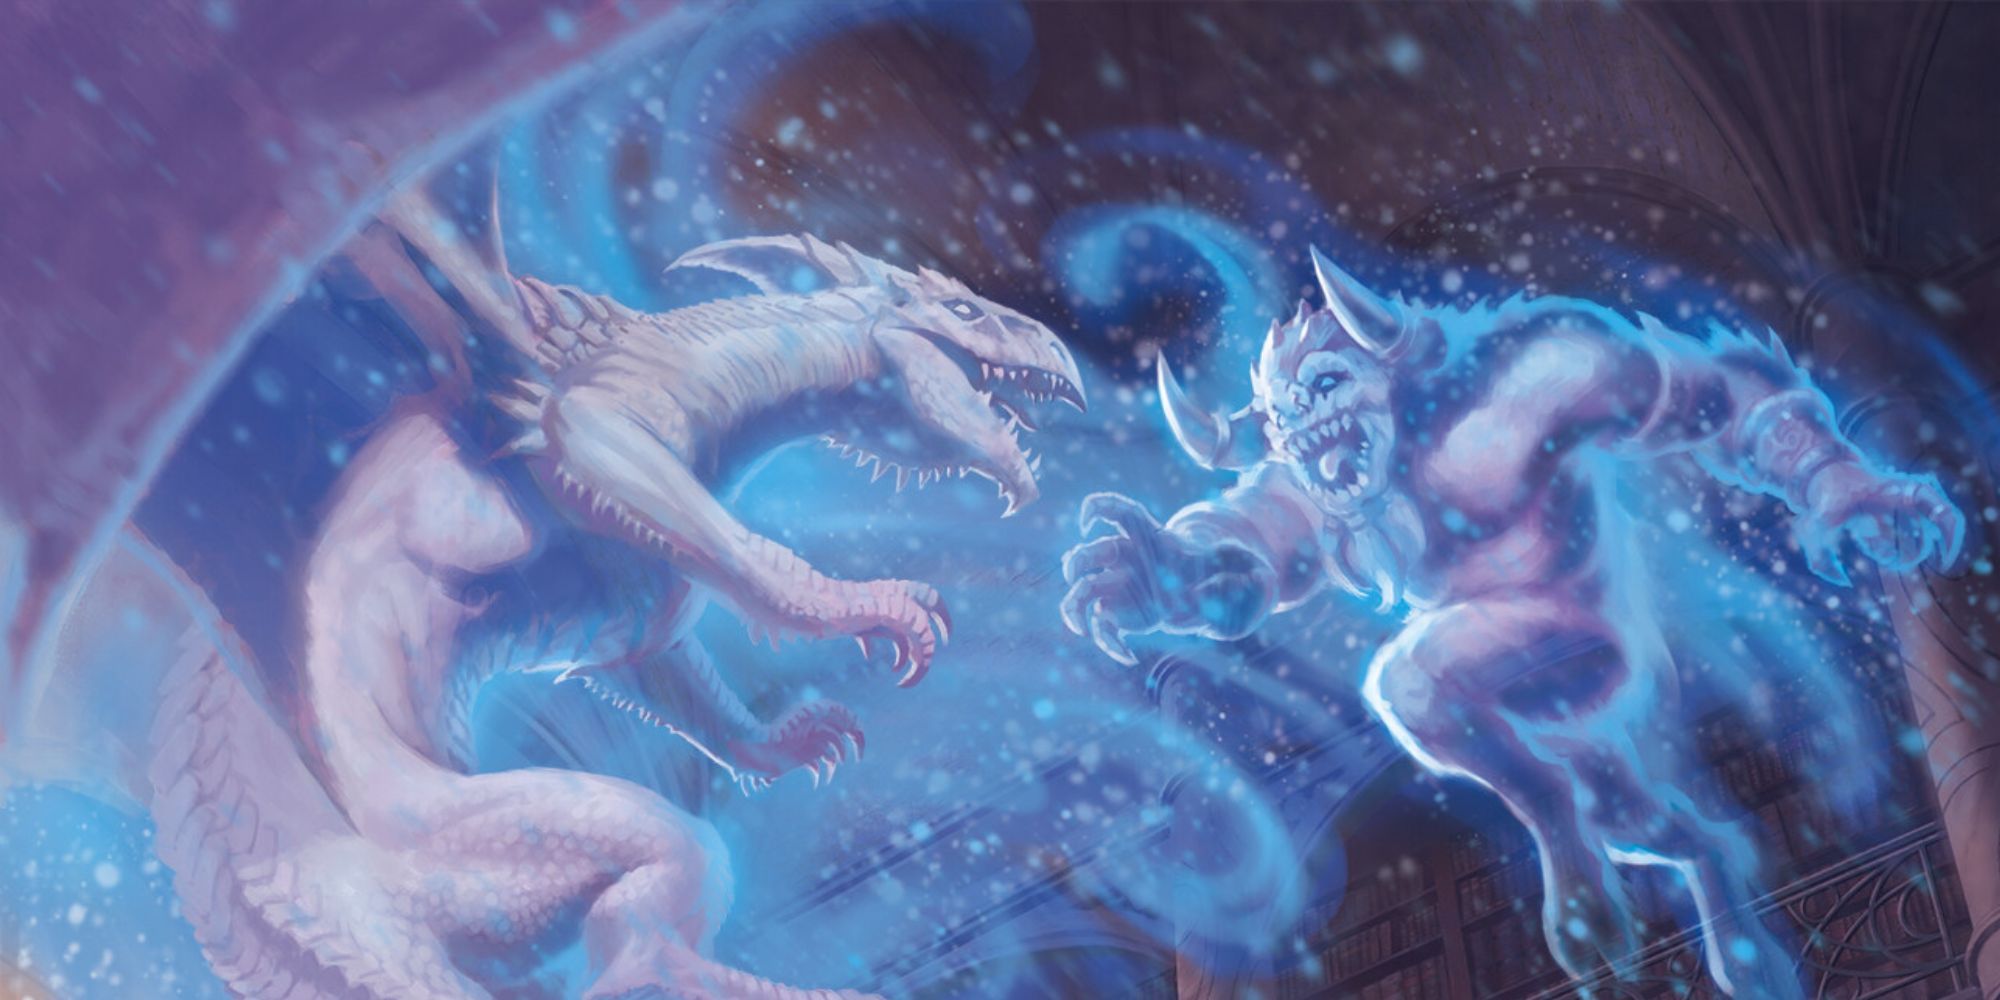 A magical illusion of a Dragon and a demon fighting in D&D Artwork